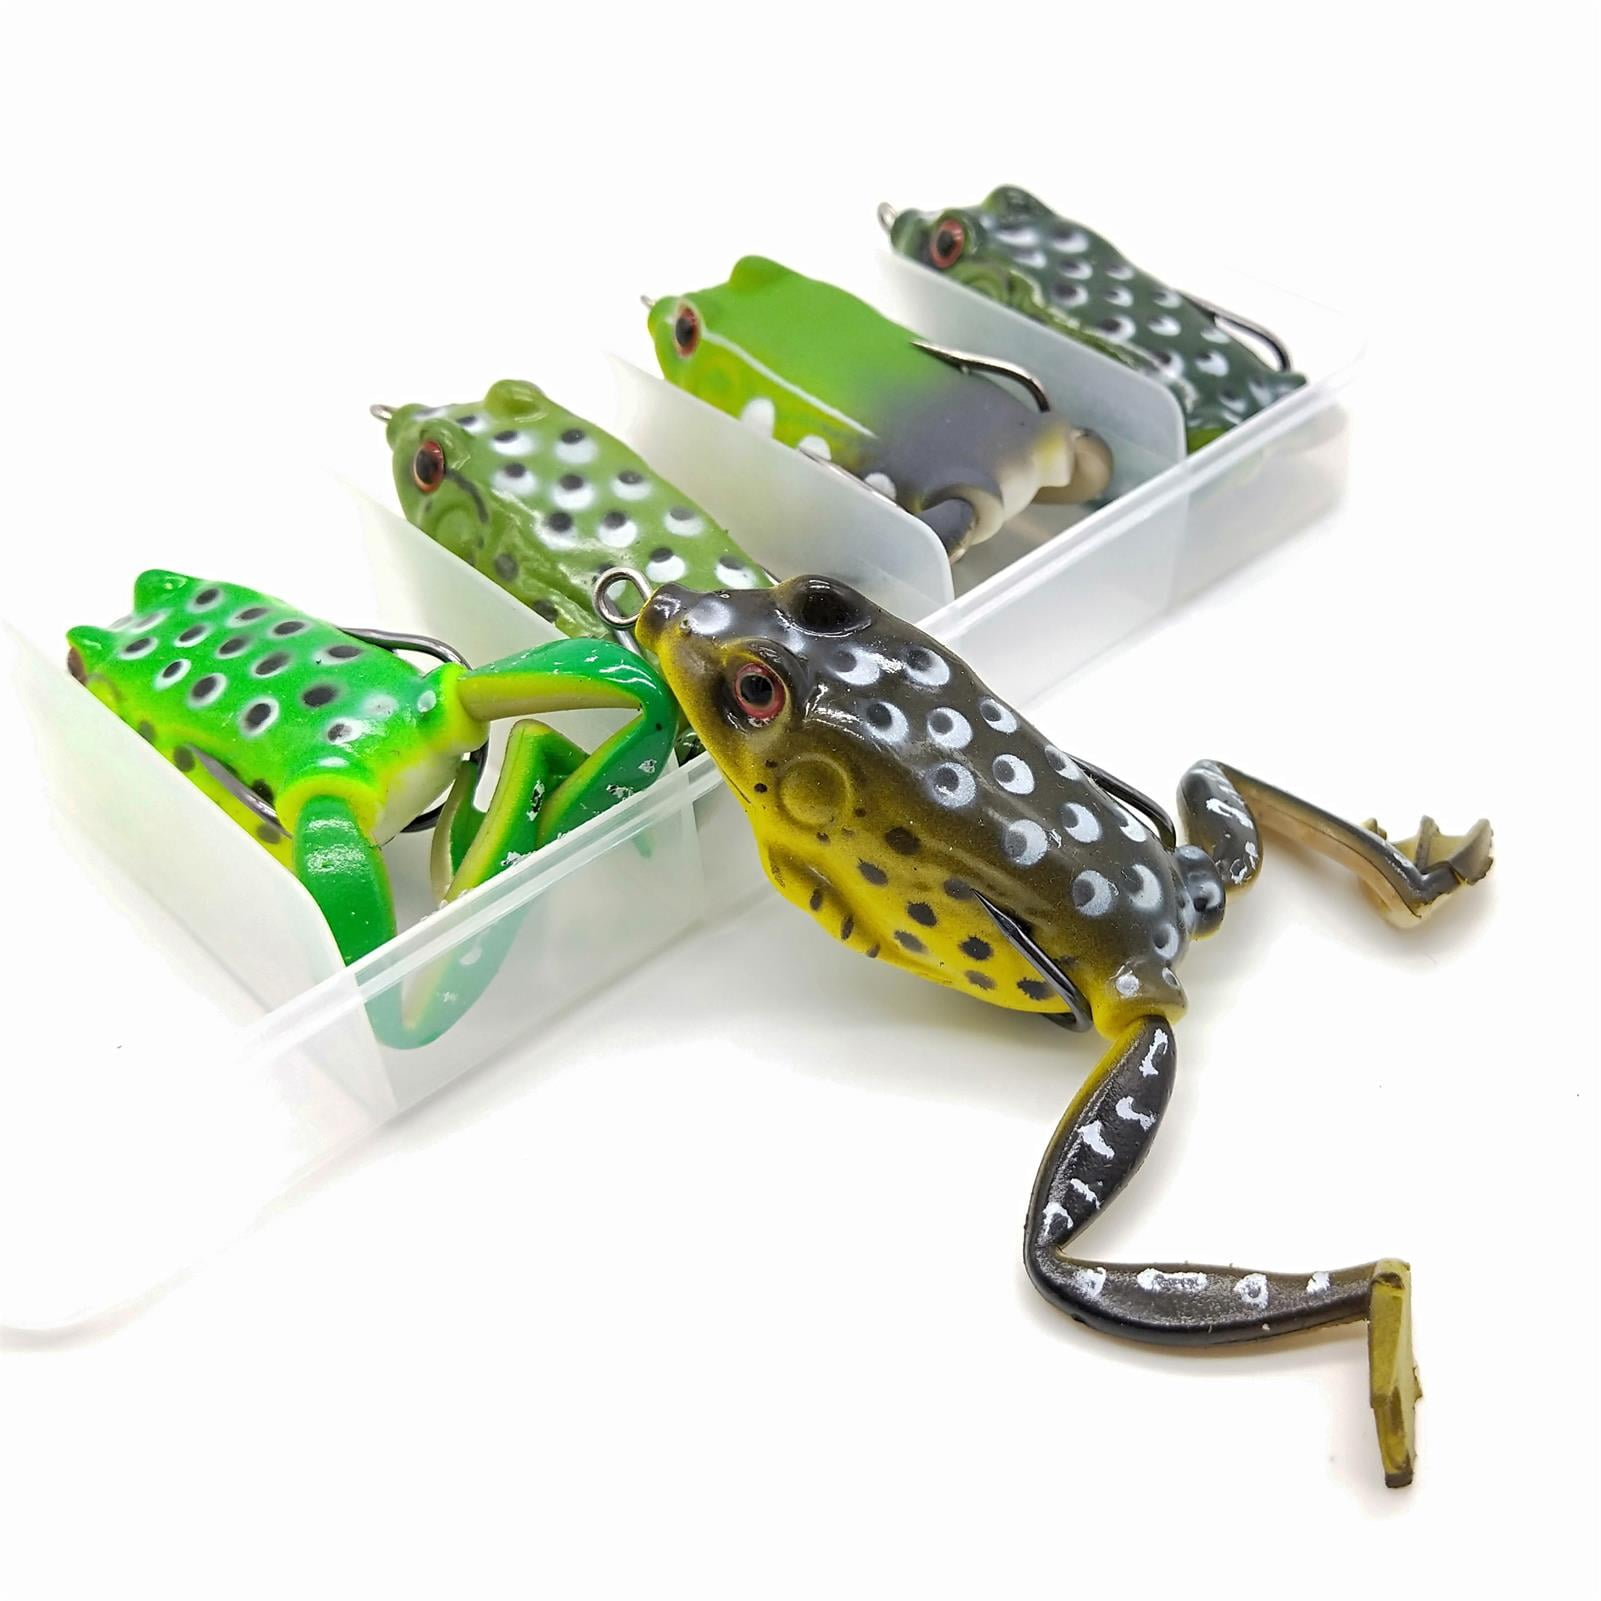 Fishing Soft Bait Artificial Topwater Frog Lure (5 Pcs / Box) at Rs 495/box, New Items in Nadia